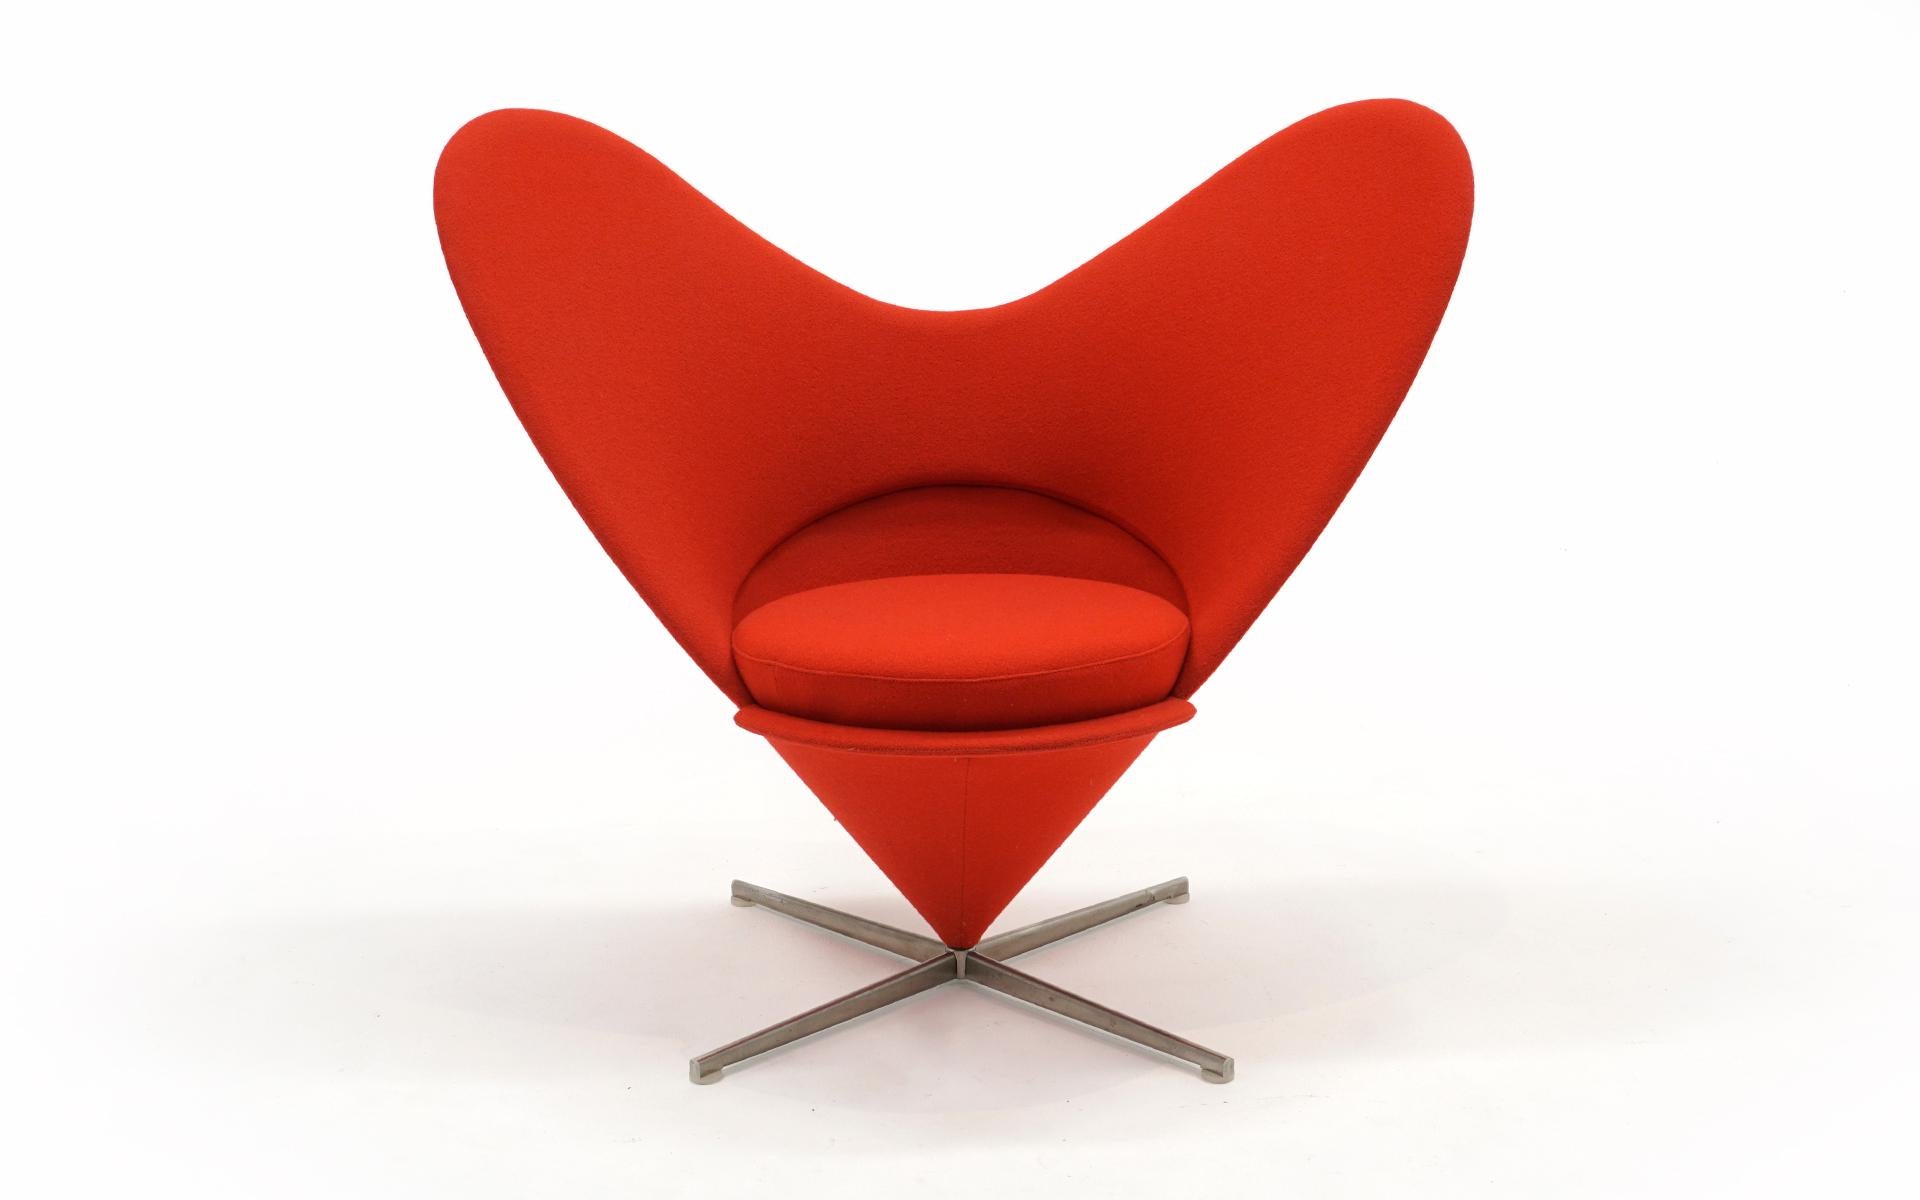 Cone Heart Chair designed by Verner Panton, made by Vitra. Original red upholstery in very good condition with few if any signs of use.